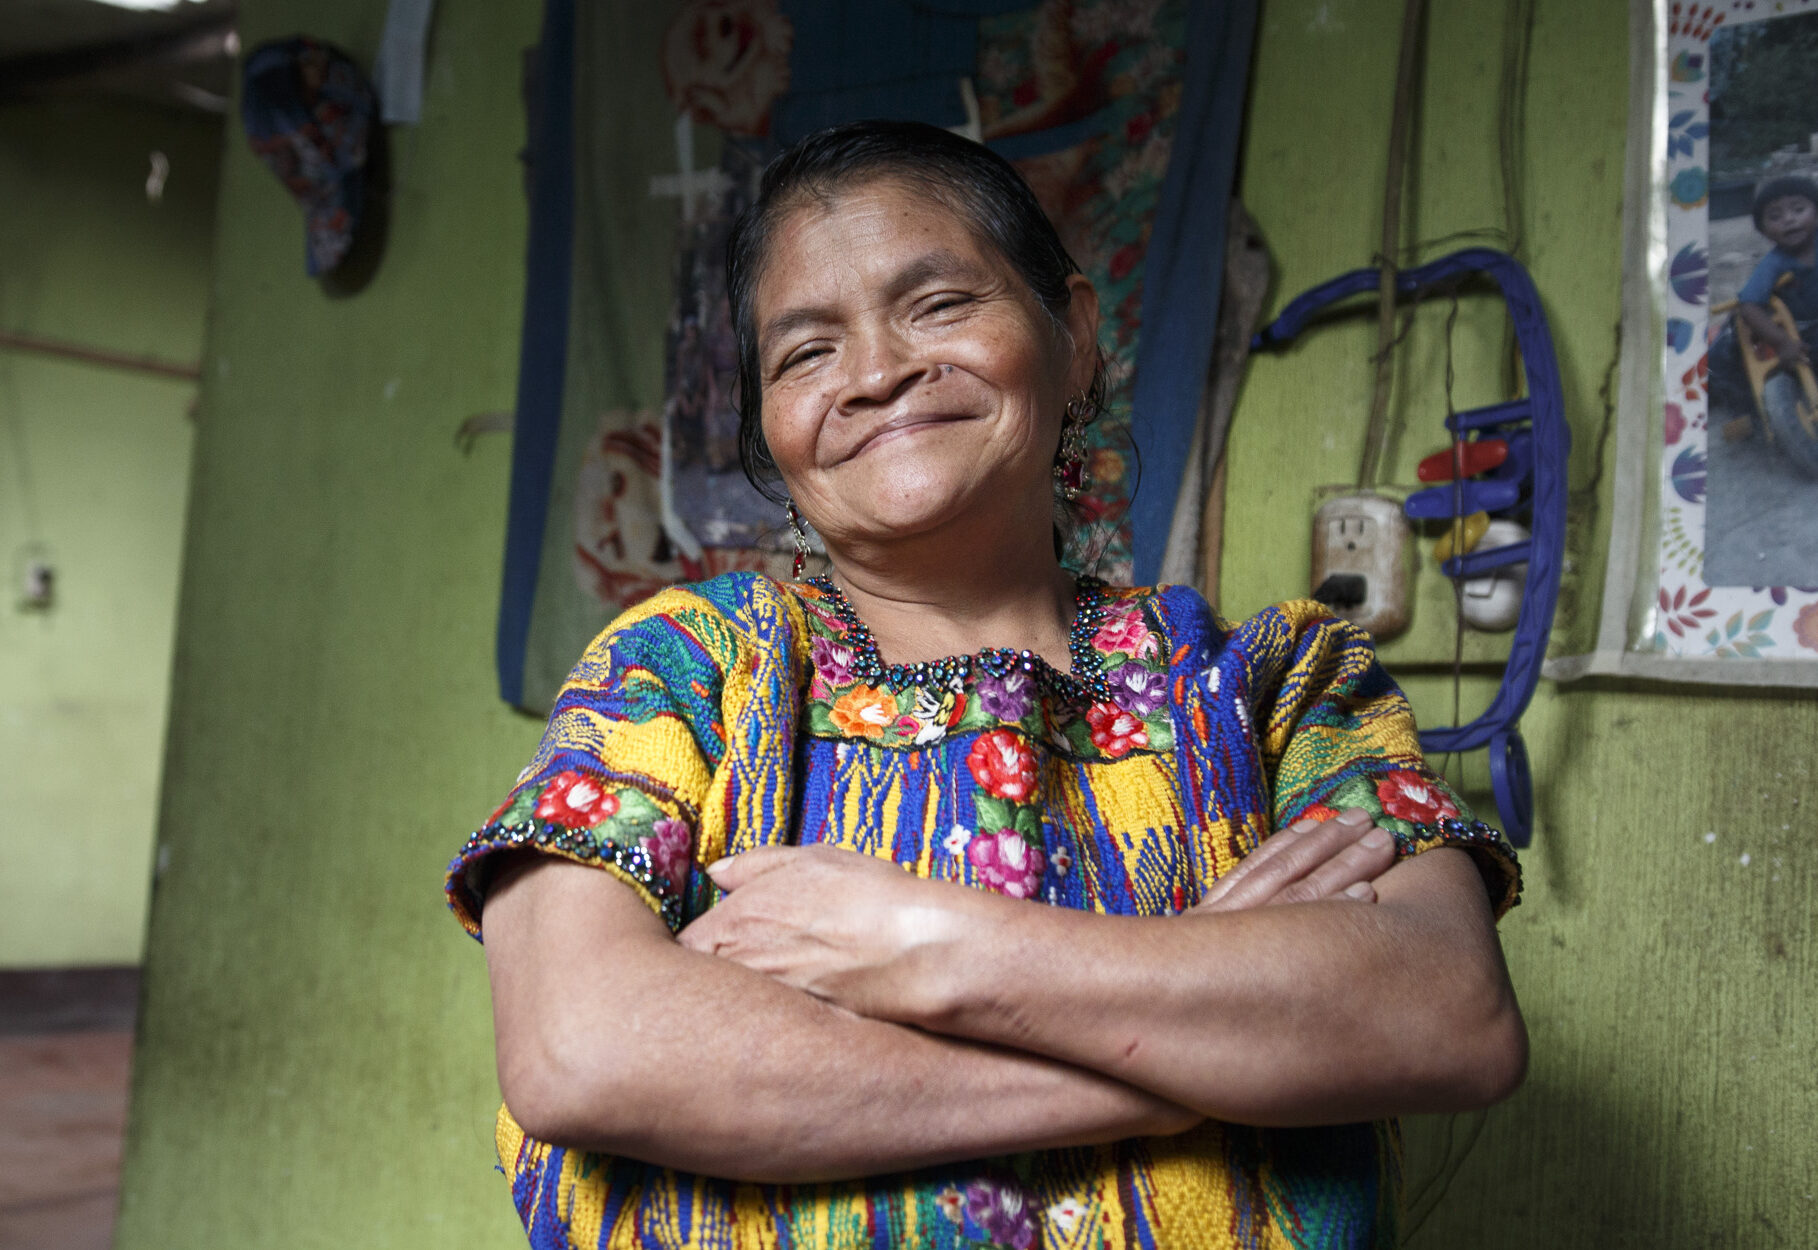 Maria, a client of Genesis in Guatemala